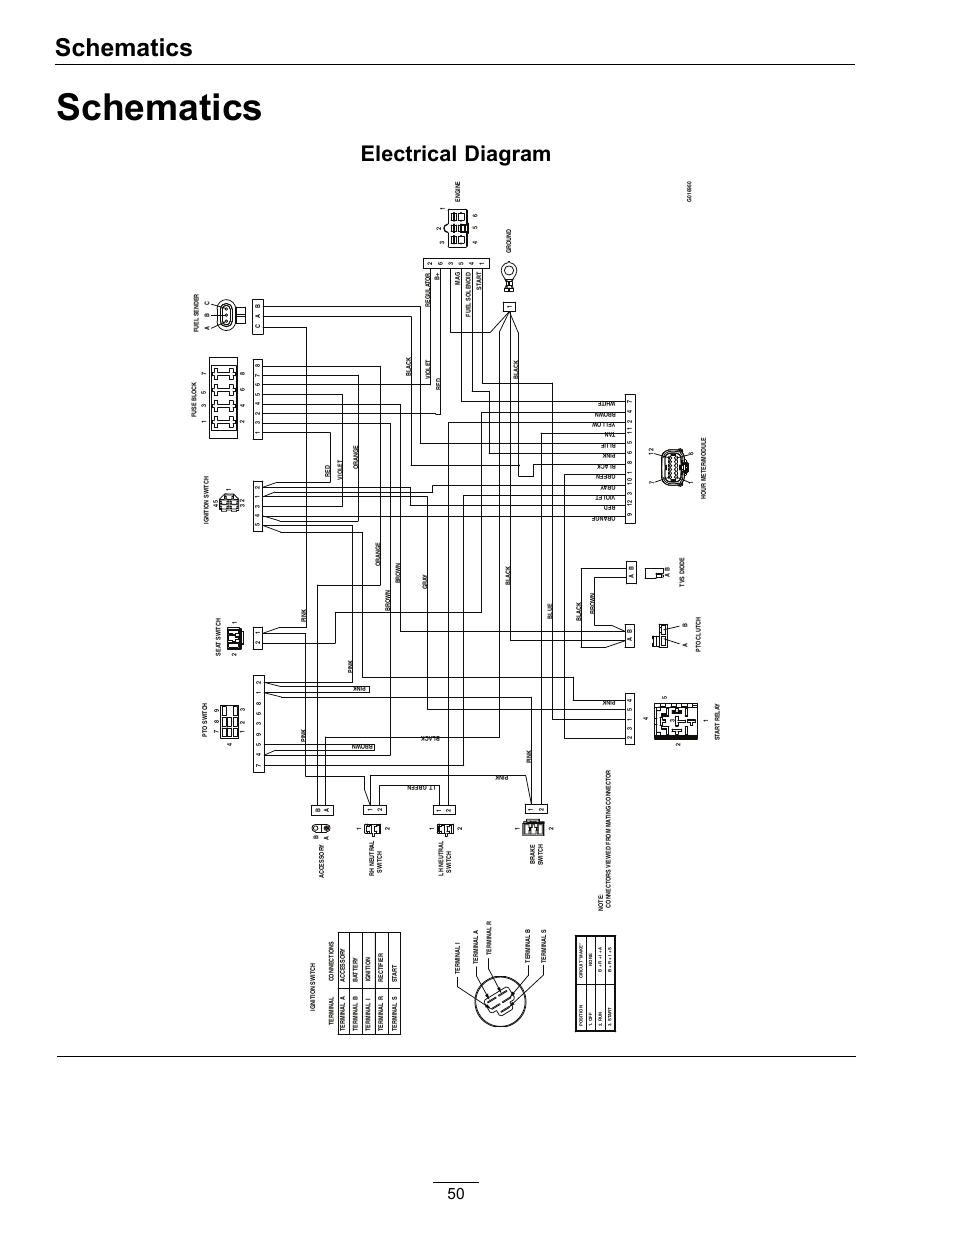 bill lawrence 5 position tele switch wiring diagram